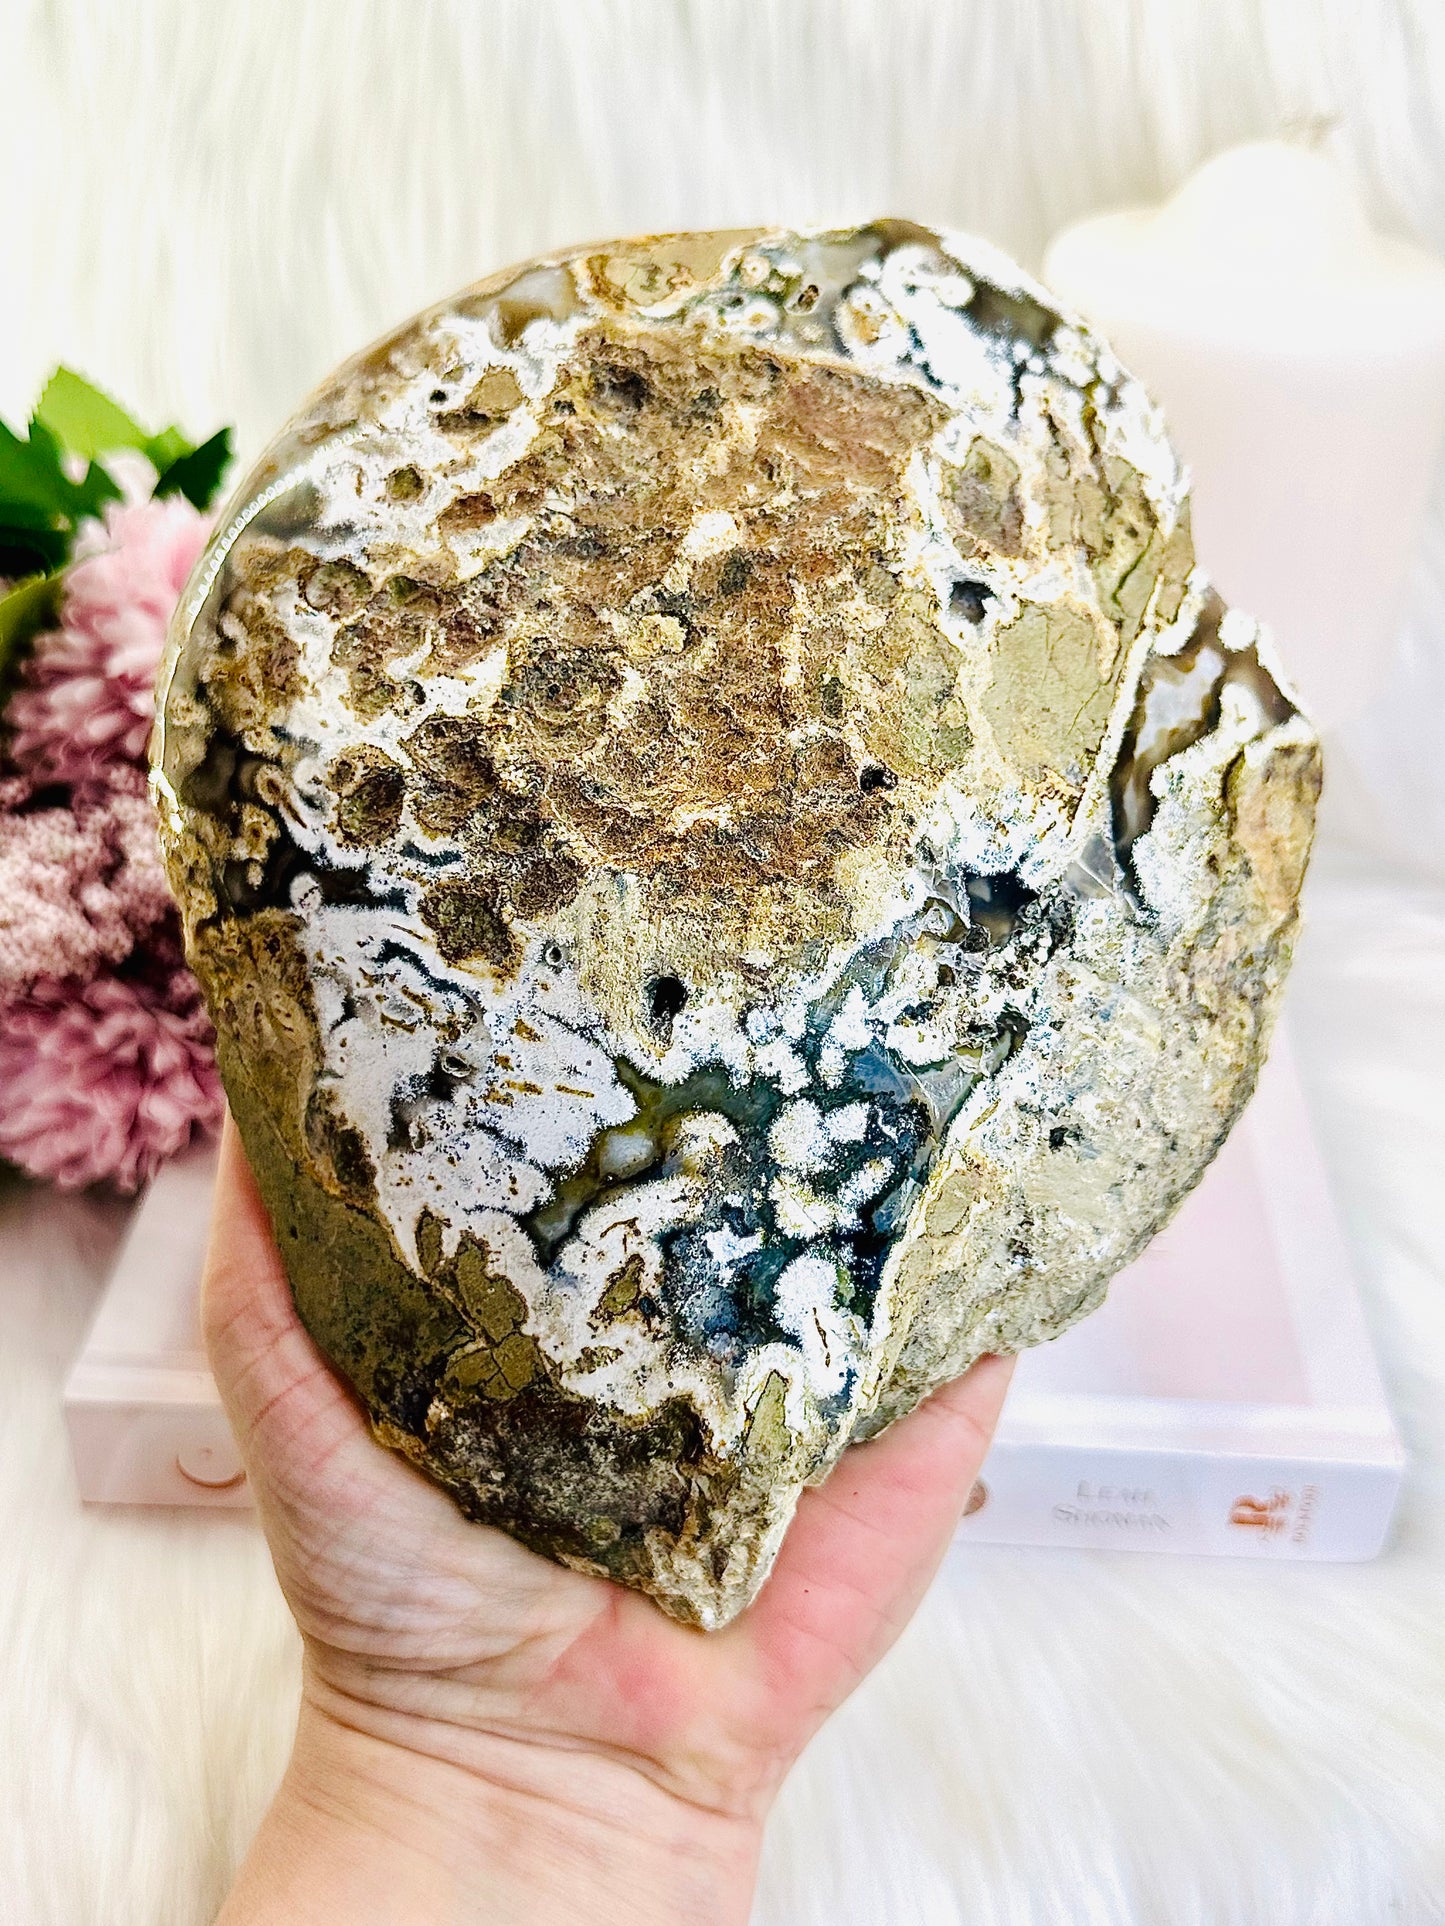 A TRUE UNIQUE STATEMENT PIECE!!!! OMG!!! Absolutely Stunning Large 1.1KG 24cm (inc stand) Druzy Amethyst Obicular Jasper Slab On Stand From Brazil